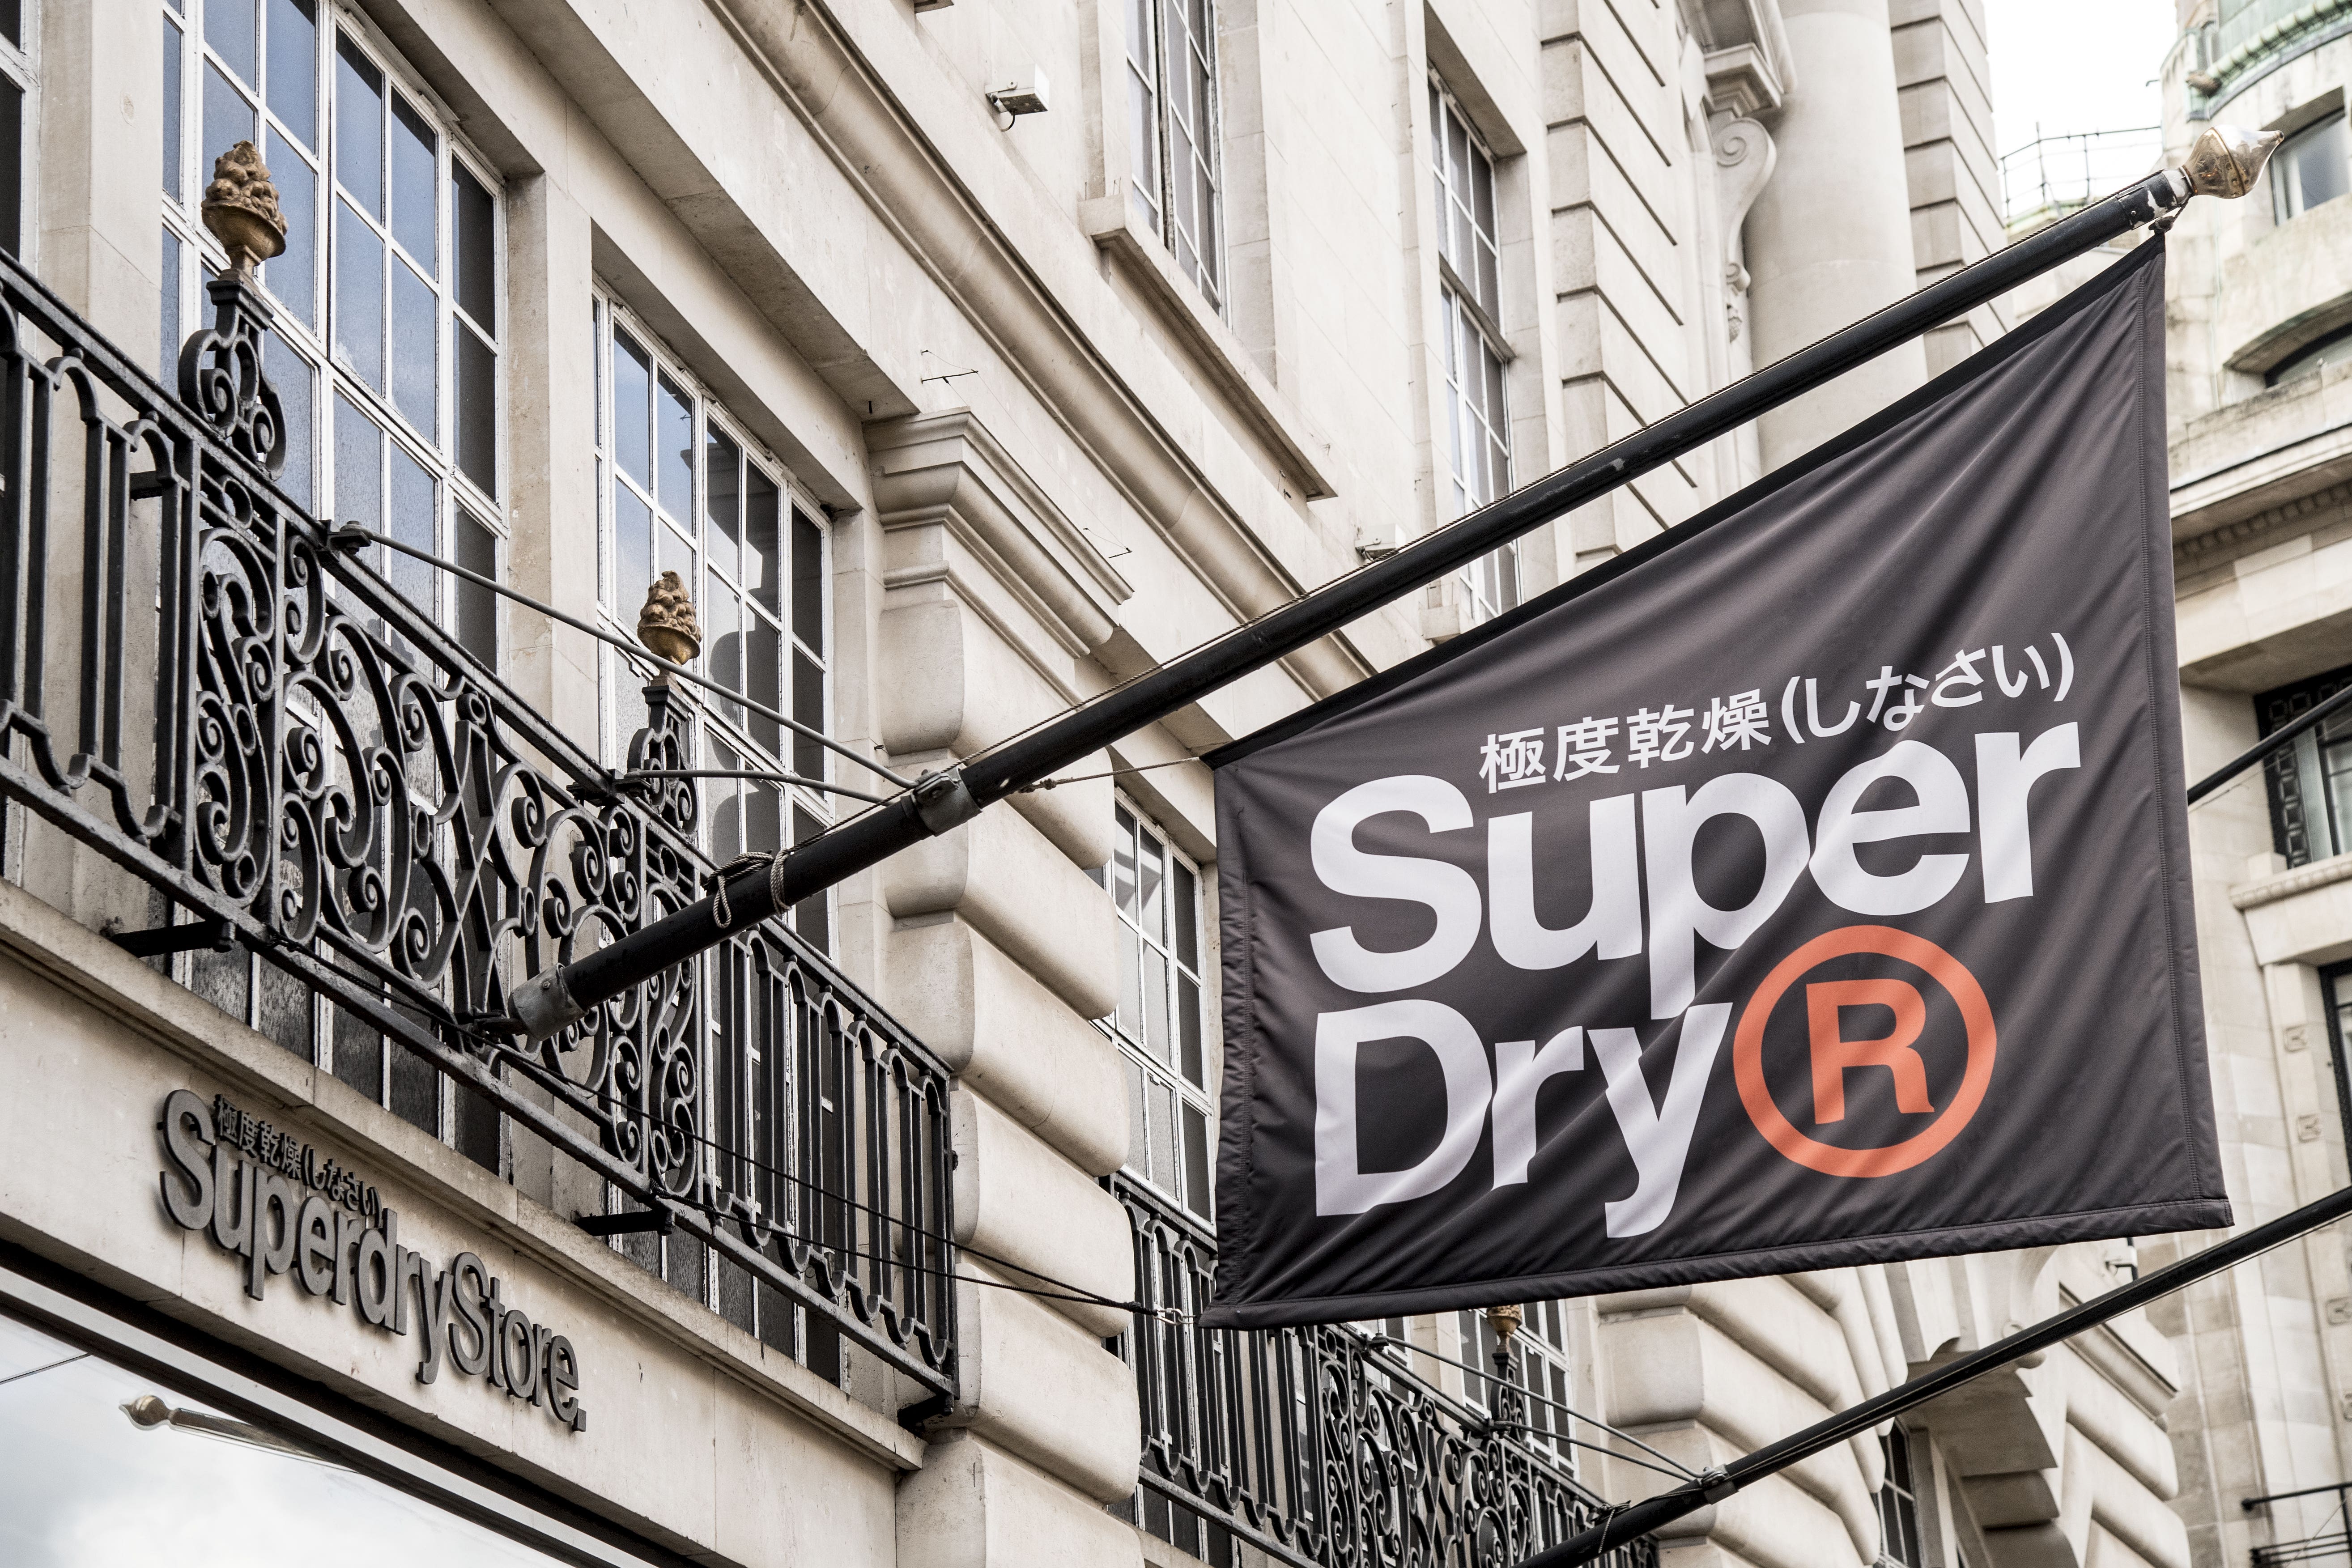 Superdry has said it is assessing ‘cost saving options’ with advisers after reports it was struggling